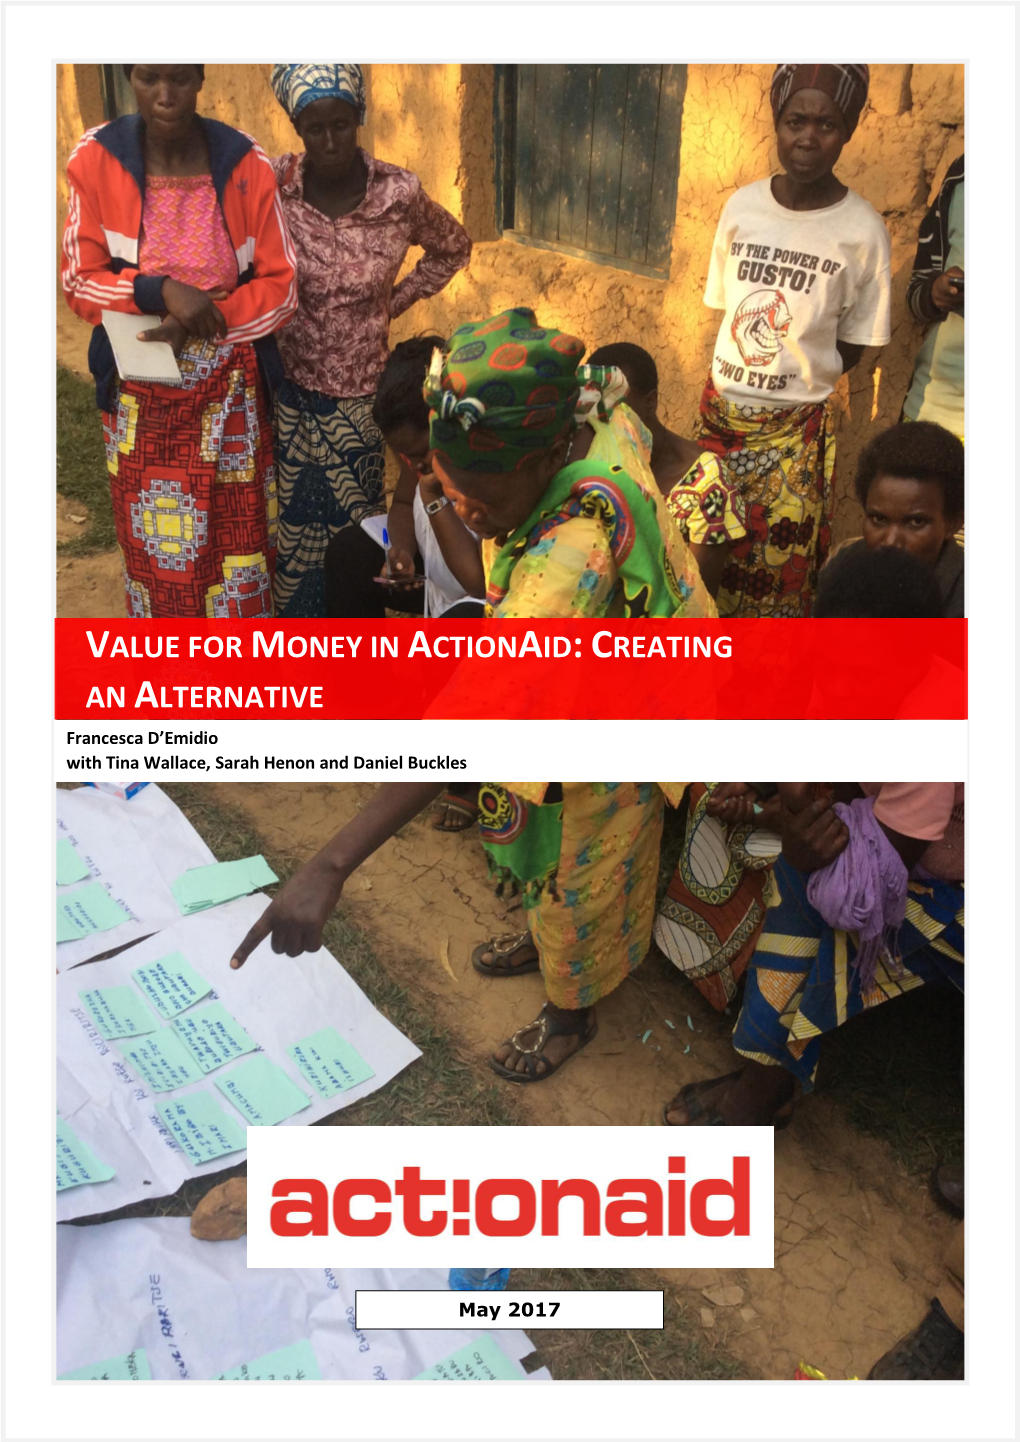 Value for Money in Actionaid: Creating an Alternative